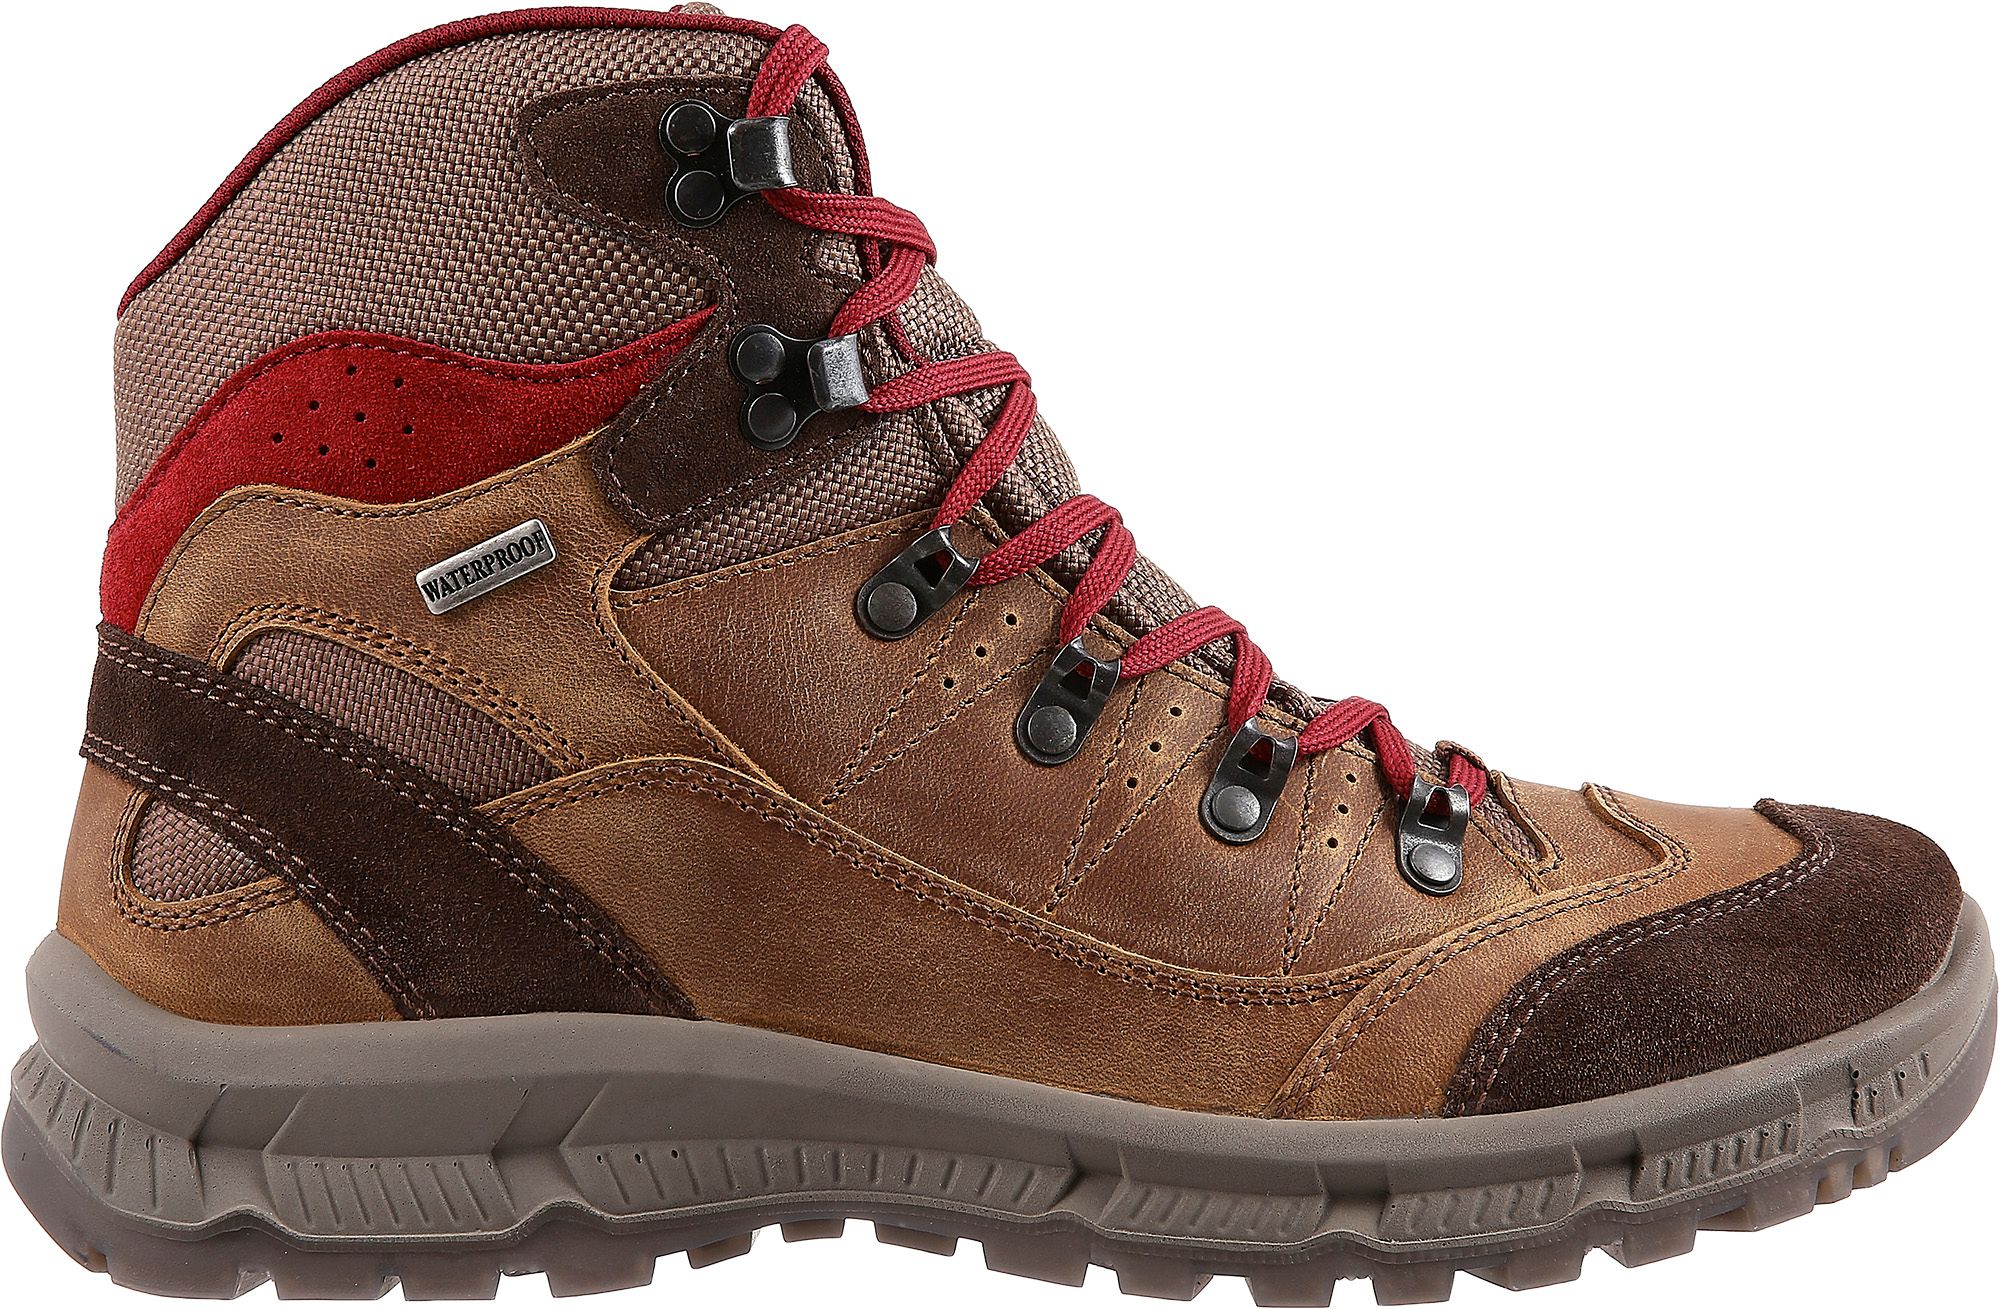 women's hiking shoes clearance